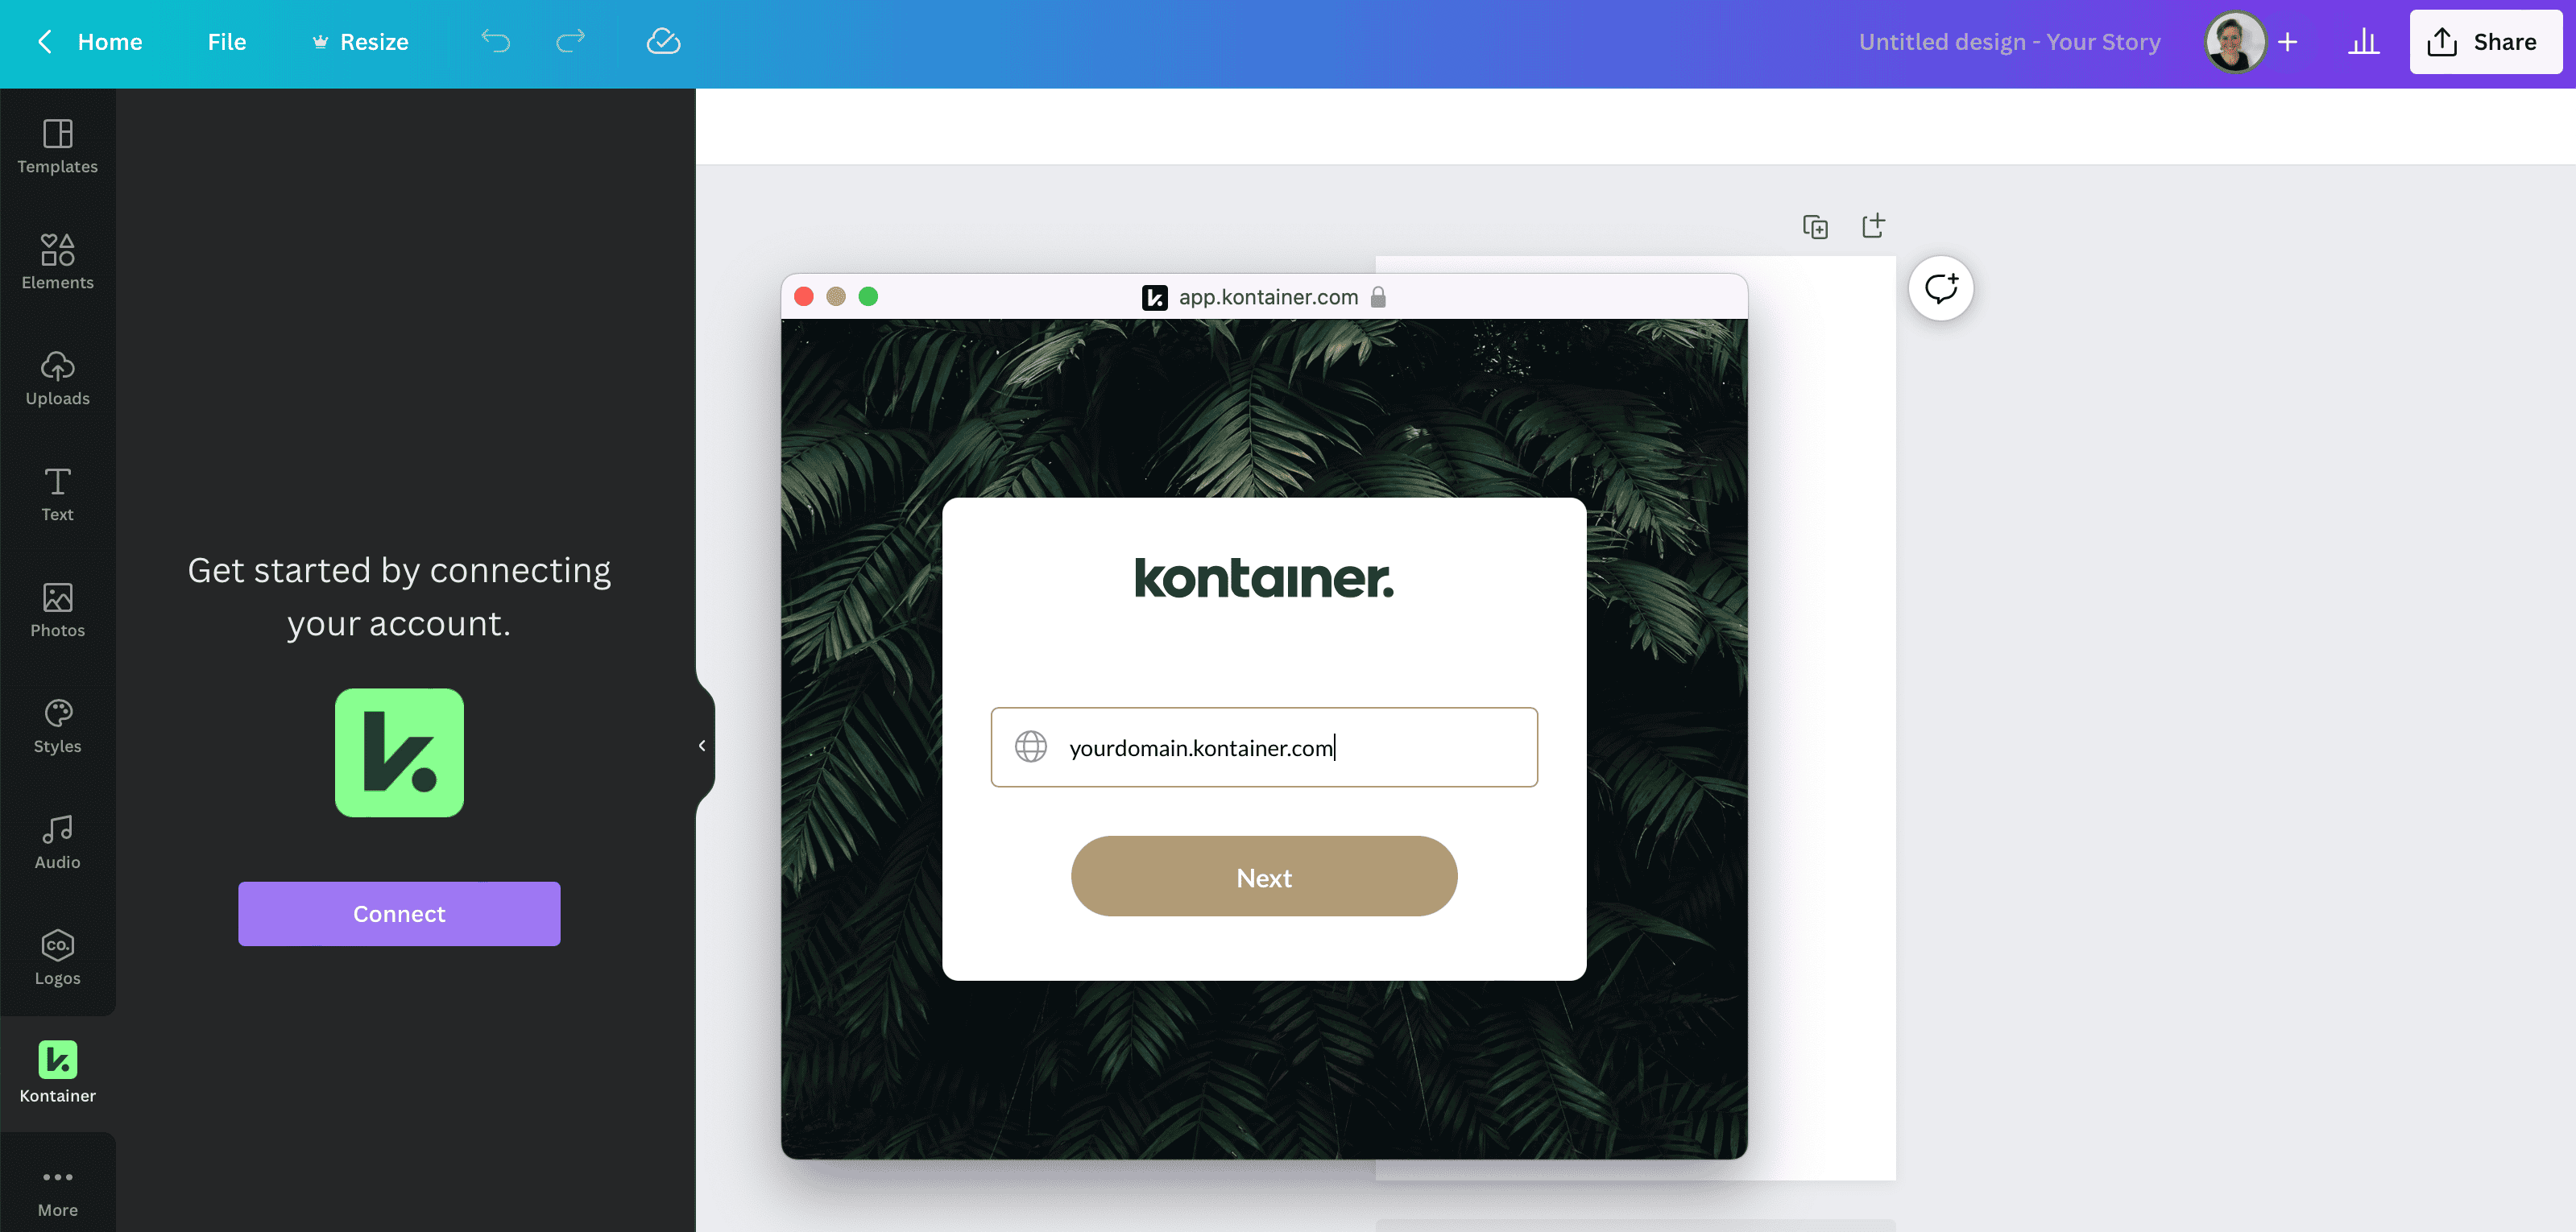 Kontainer plugin in Canva. Connect account